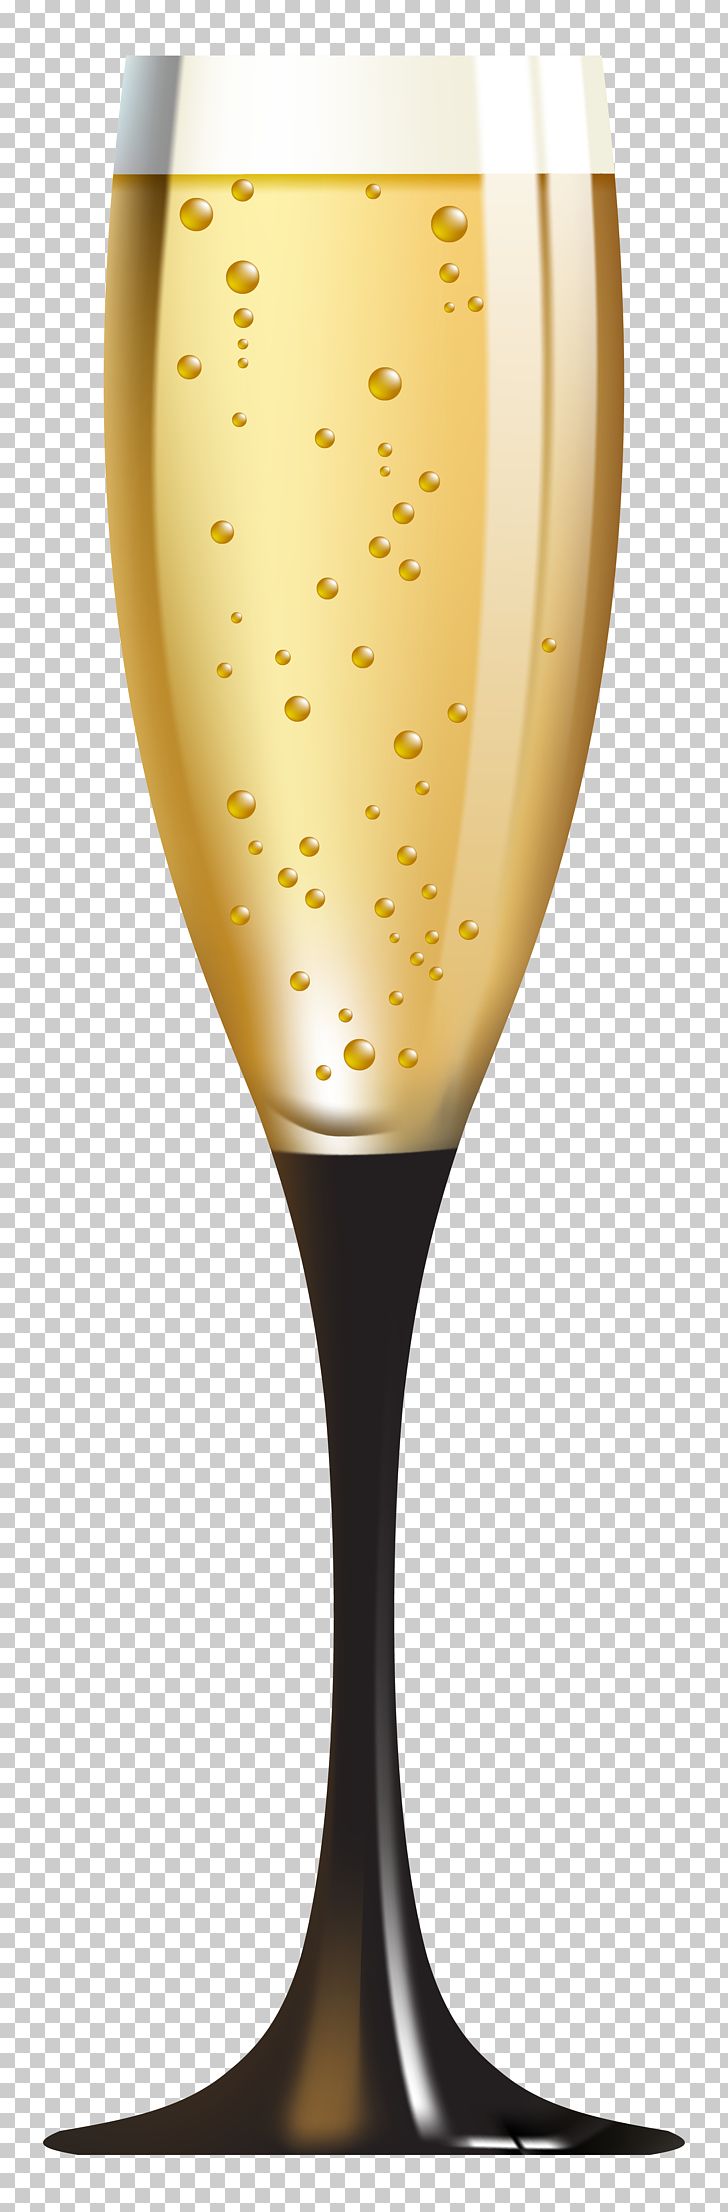 Champagne Glass Cocktail Wine Martini PNG, Clipart, Alcoholic Drink, Beer Glass, Bottle, Champagne, Champagne Glass Free PNG Download